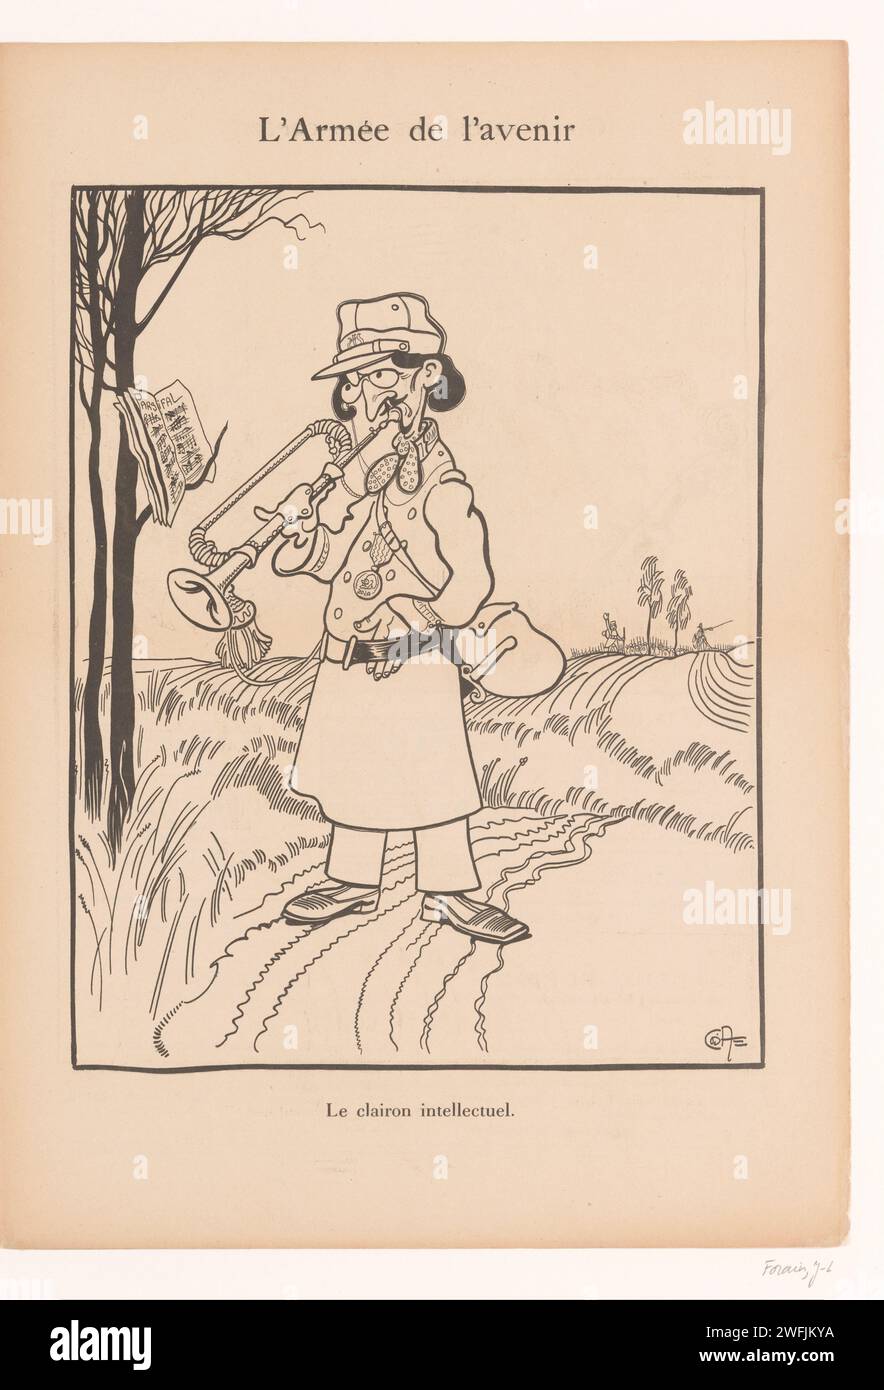 Caricature of a clarion blower in the army as intellectual, Caran d'Ache, 1898 print. magazine Print is part of a folding leaf. Paris paper  political caricatures and satires. caricatures (human types). horn, trumpet, cornet, trombone, tuba - CC - out of doors. private soldier Stock Photo